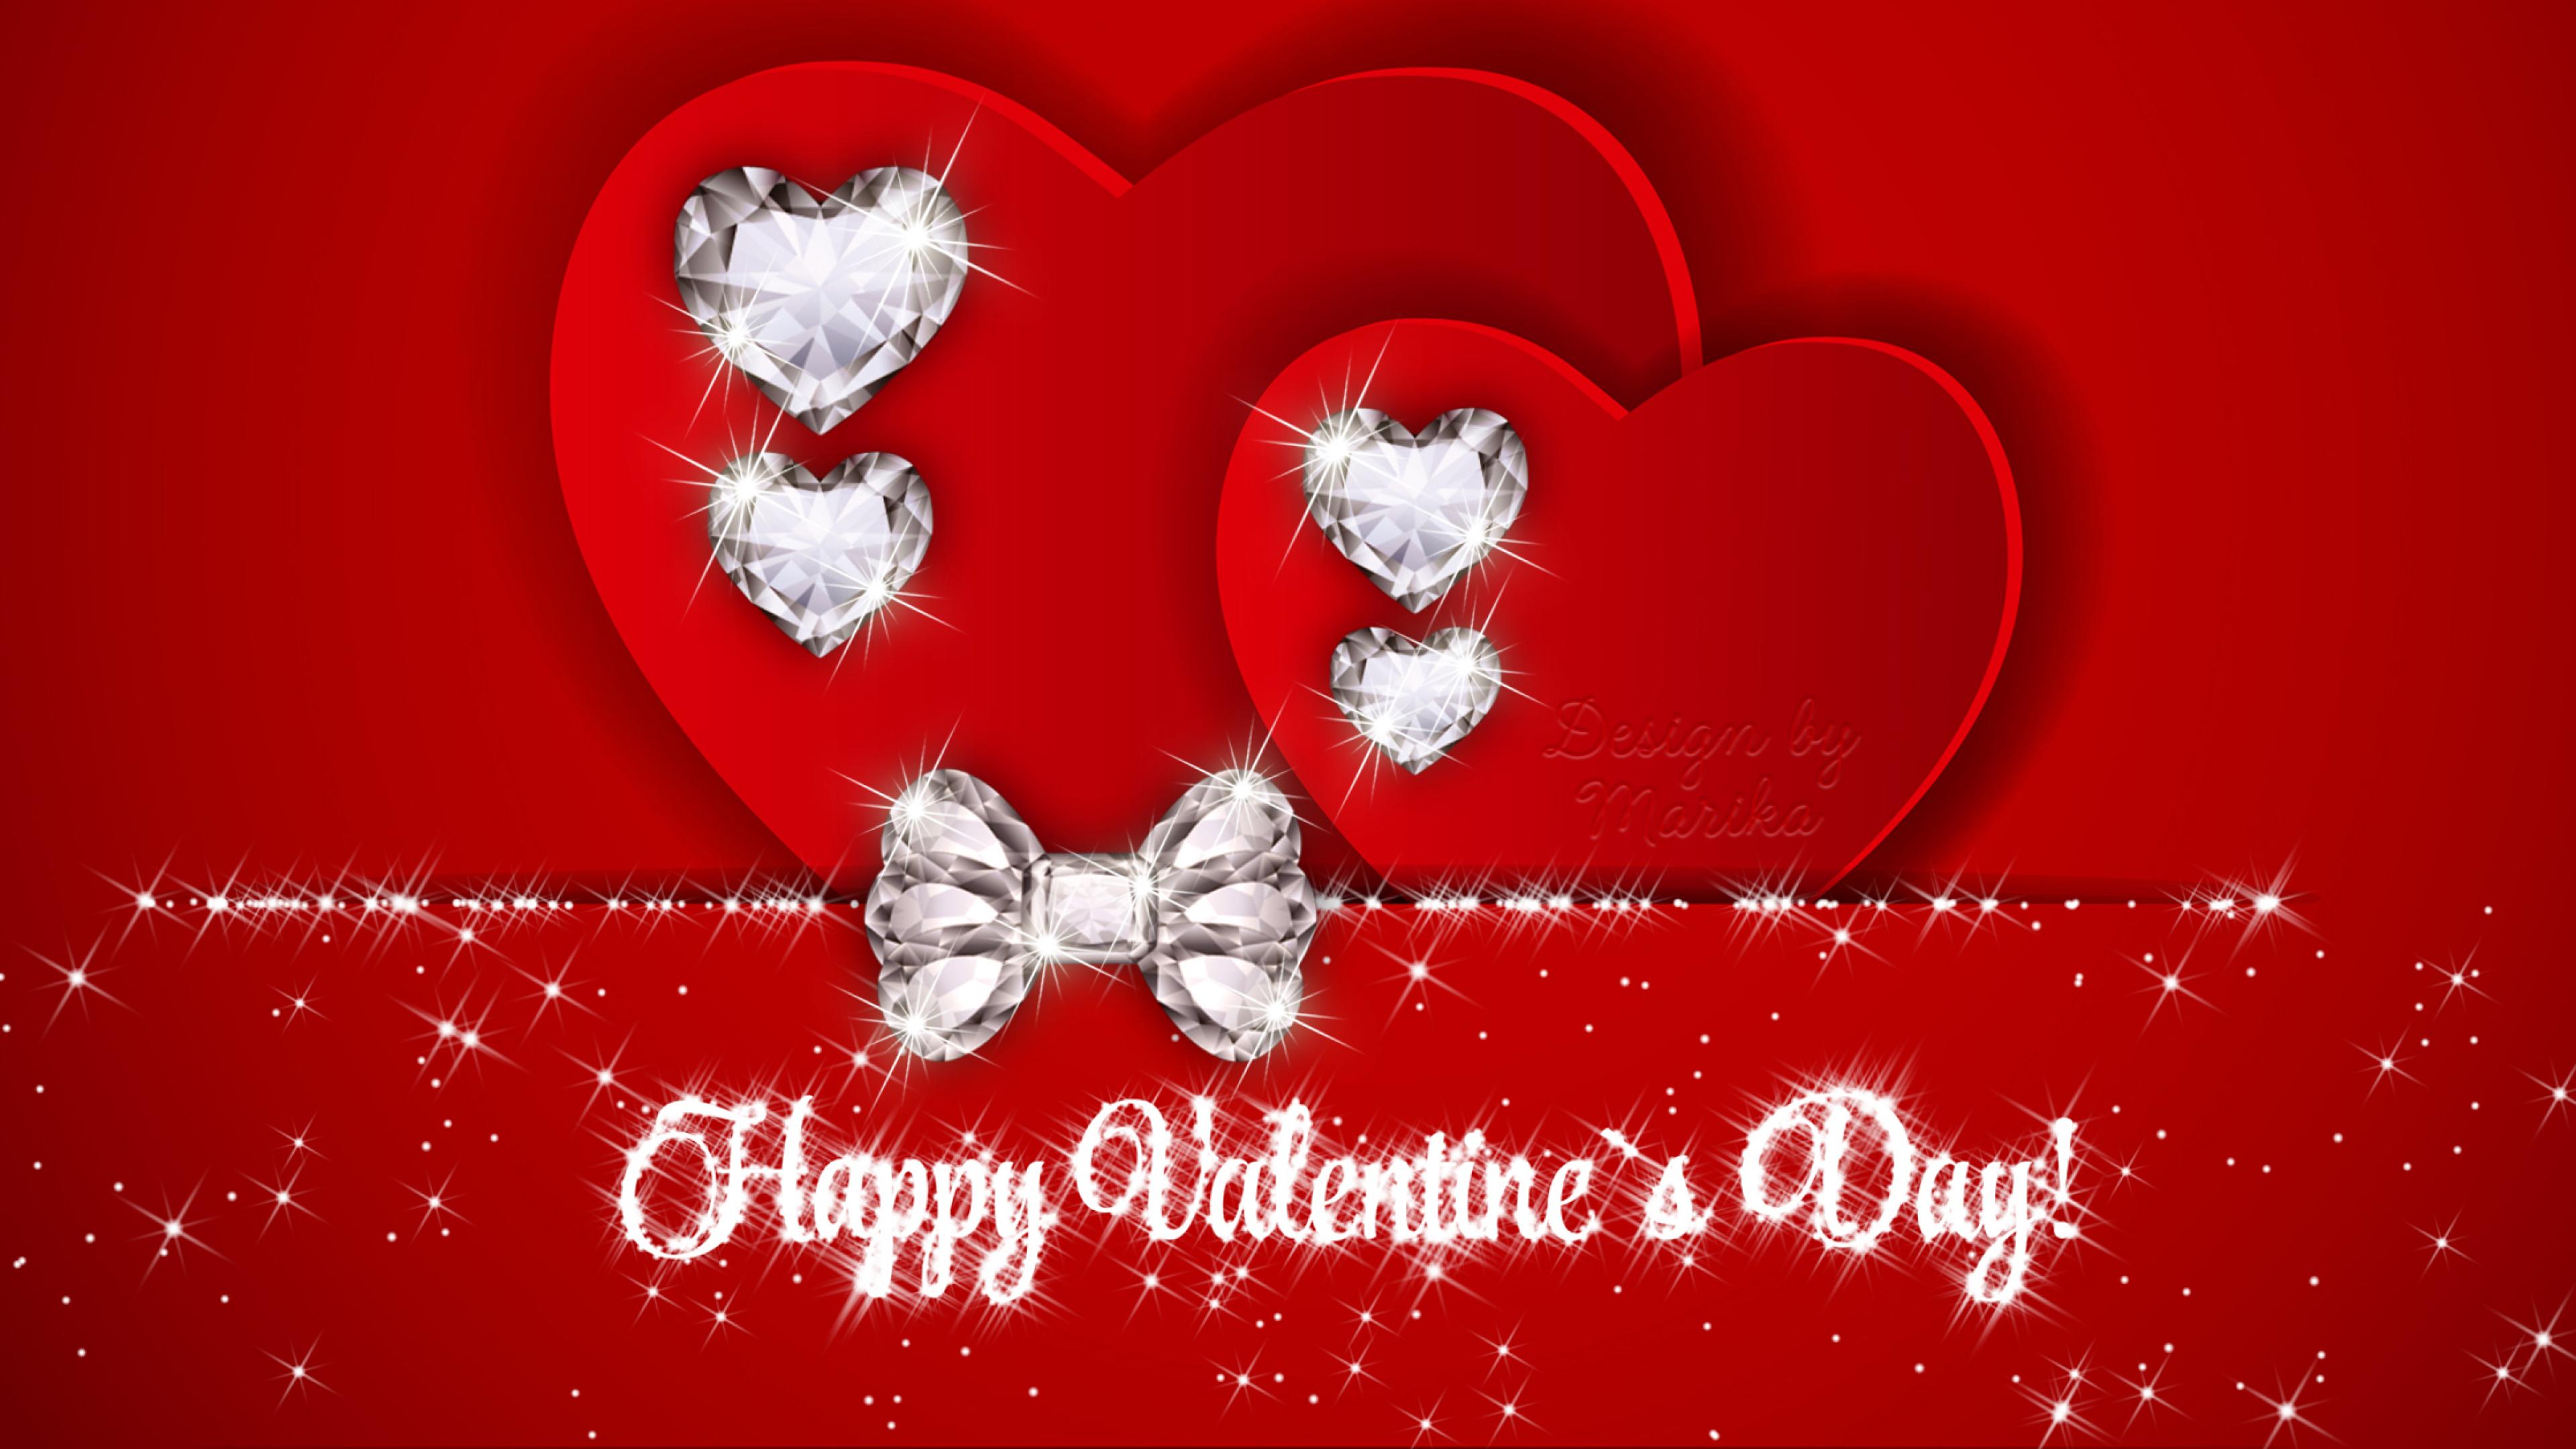 Most Beautiful Wallpapers Hd Free Valentine Day - Beautiful Wallpaper Valentine Day , HD Wallpaper & Backgrounds